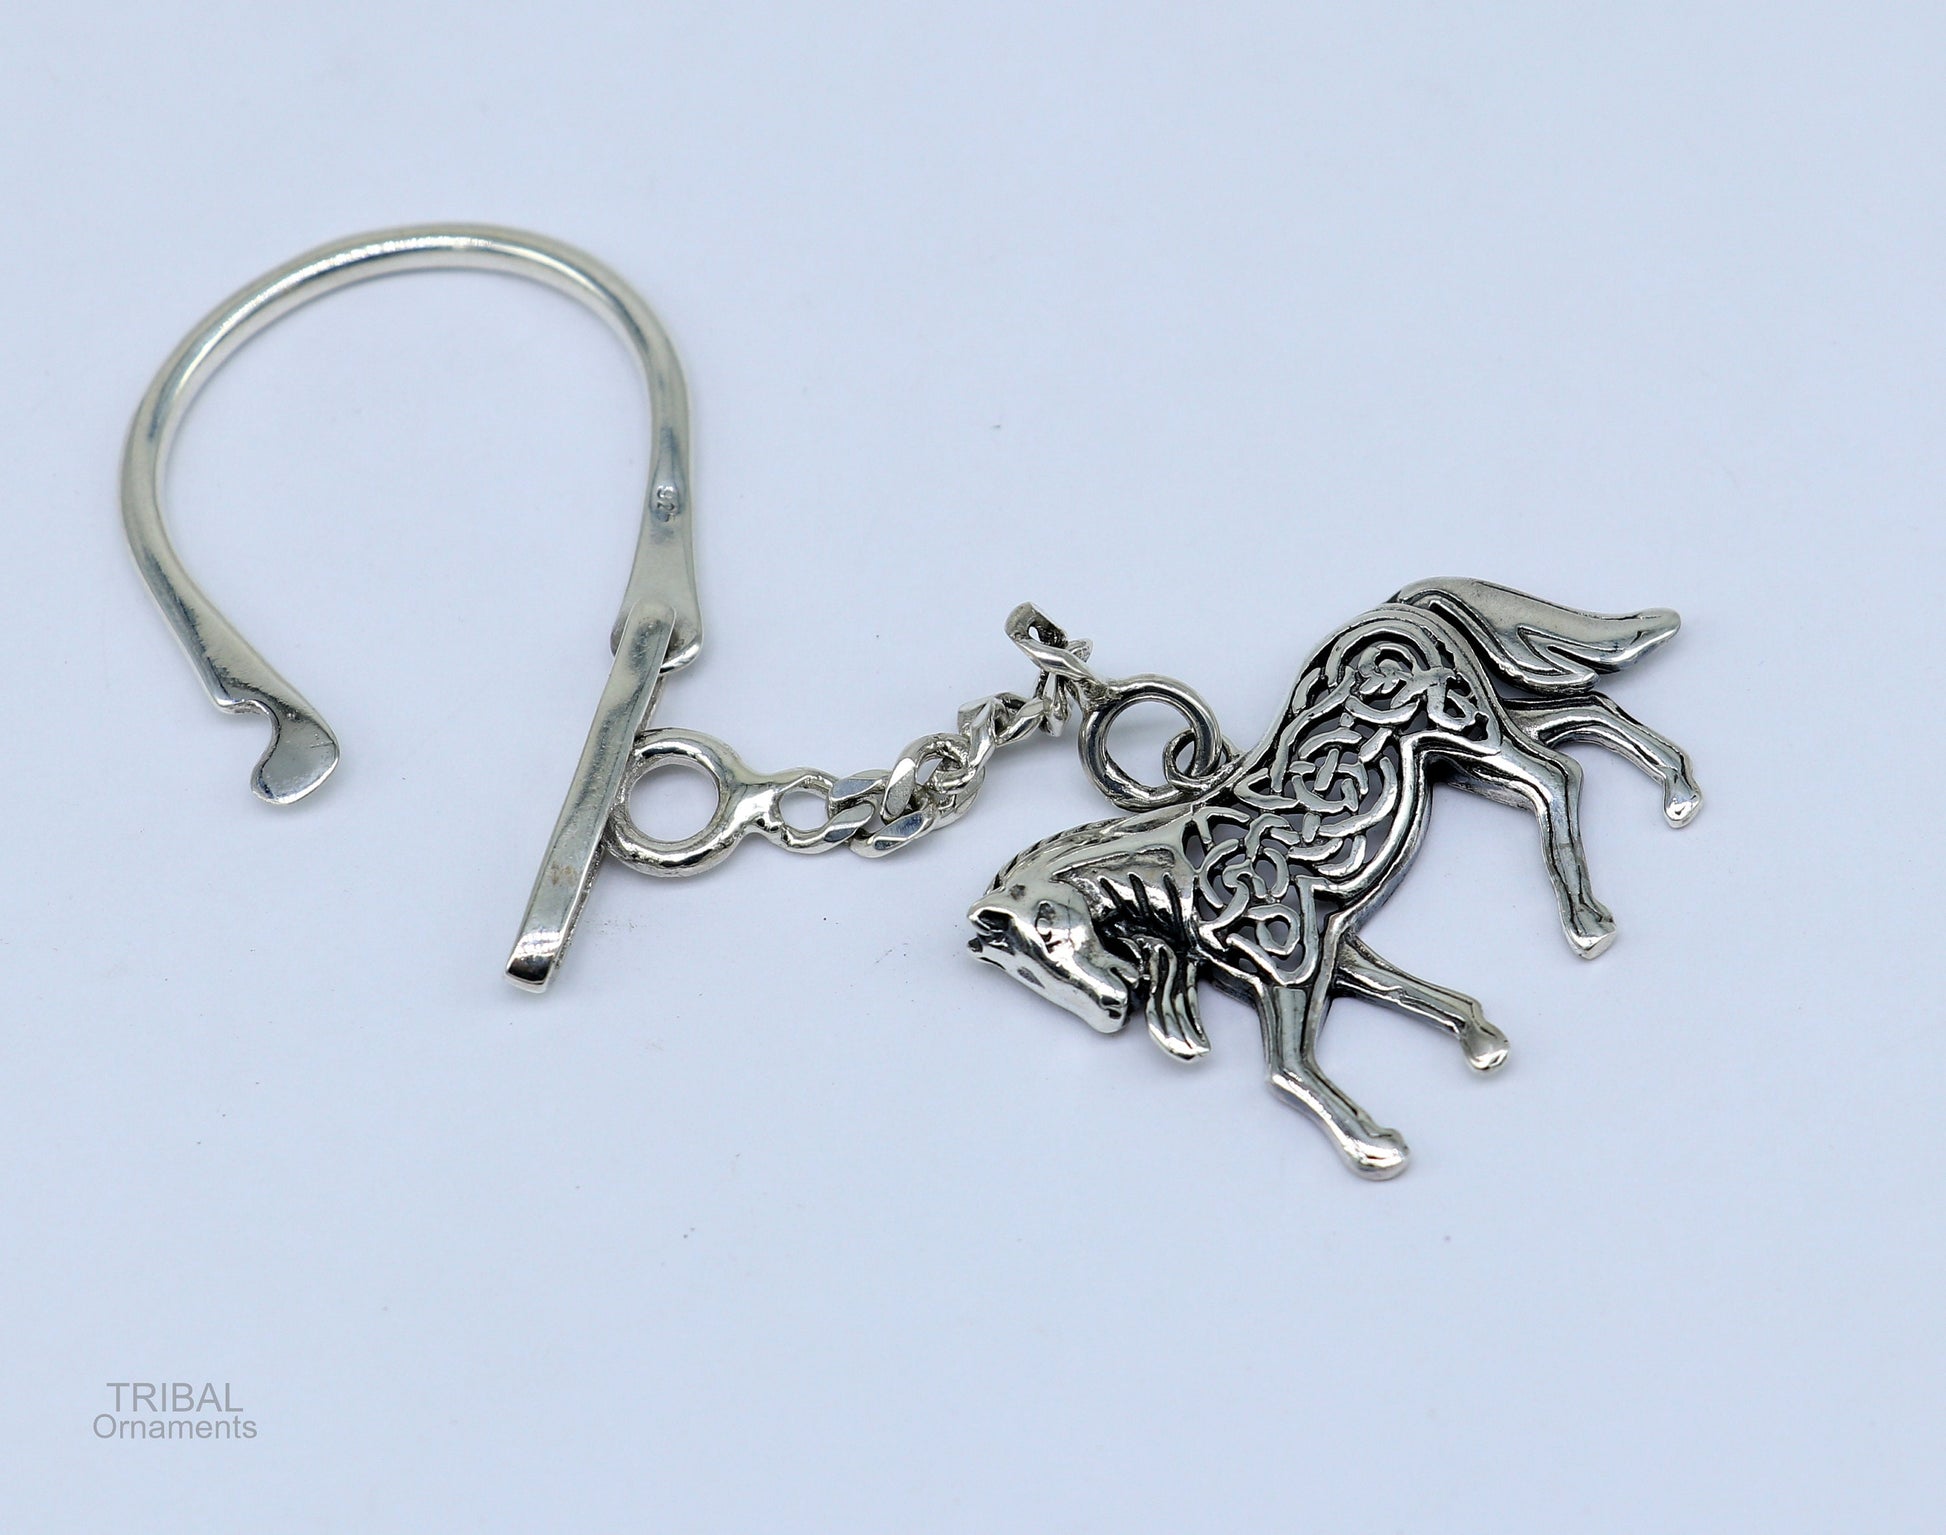 925 Sterling silver handmade unique vintage horse design solid key chain, stylish royal gifting silver accessories unisex gift kch11 - TRIBAL ORNAMENTS